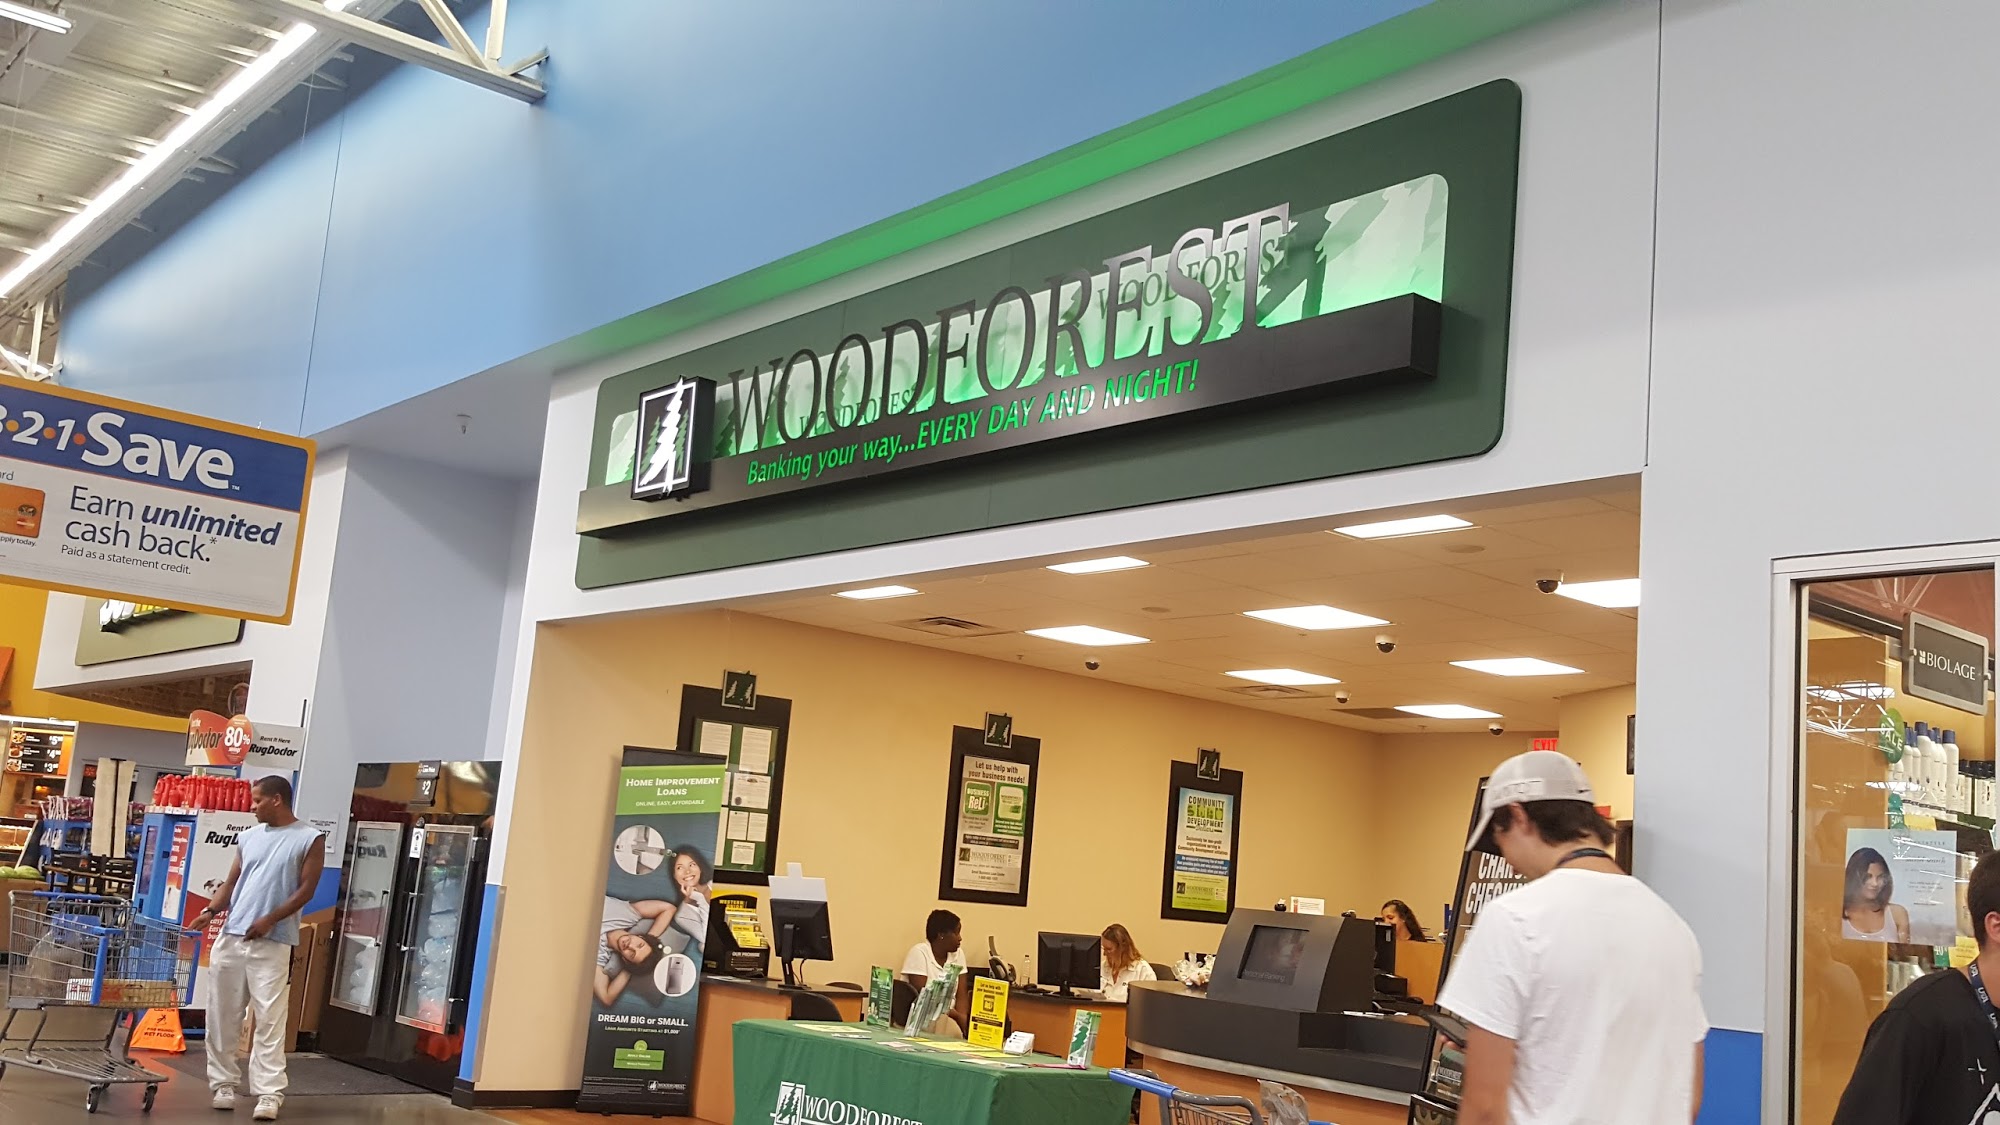 Woodforest Bank